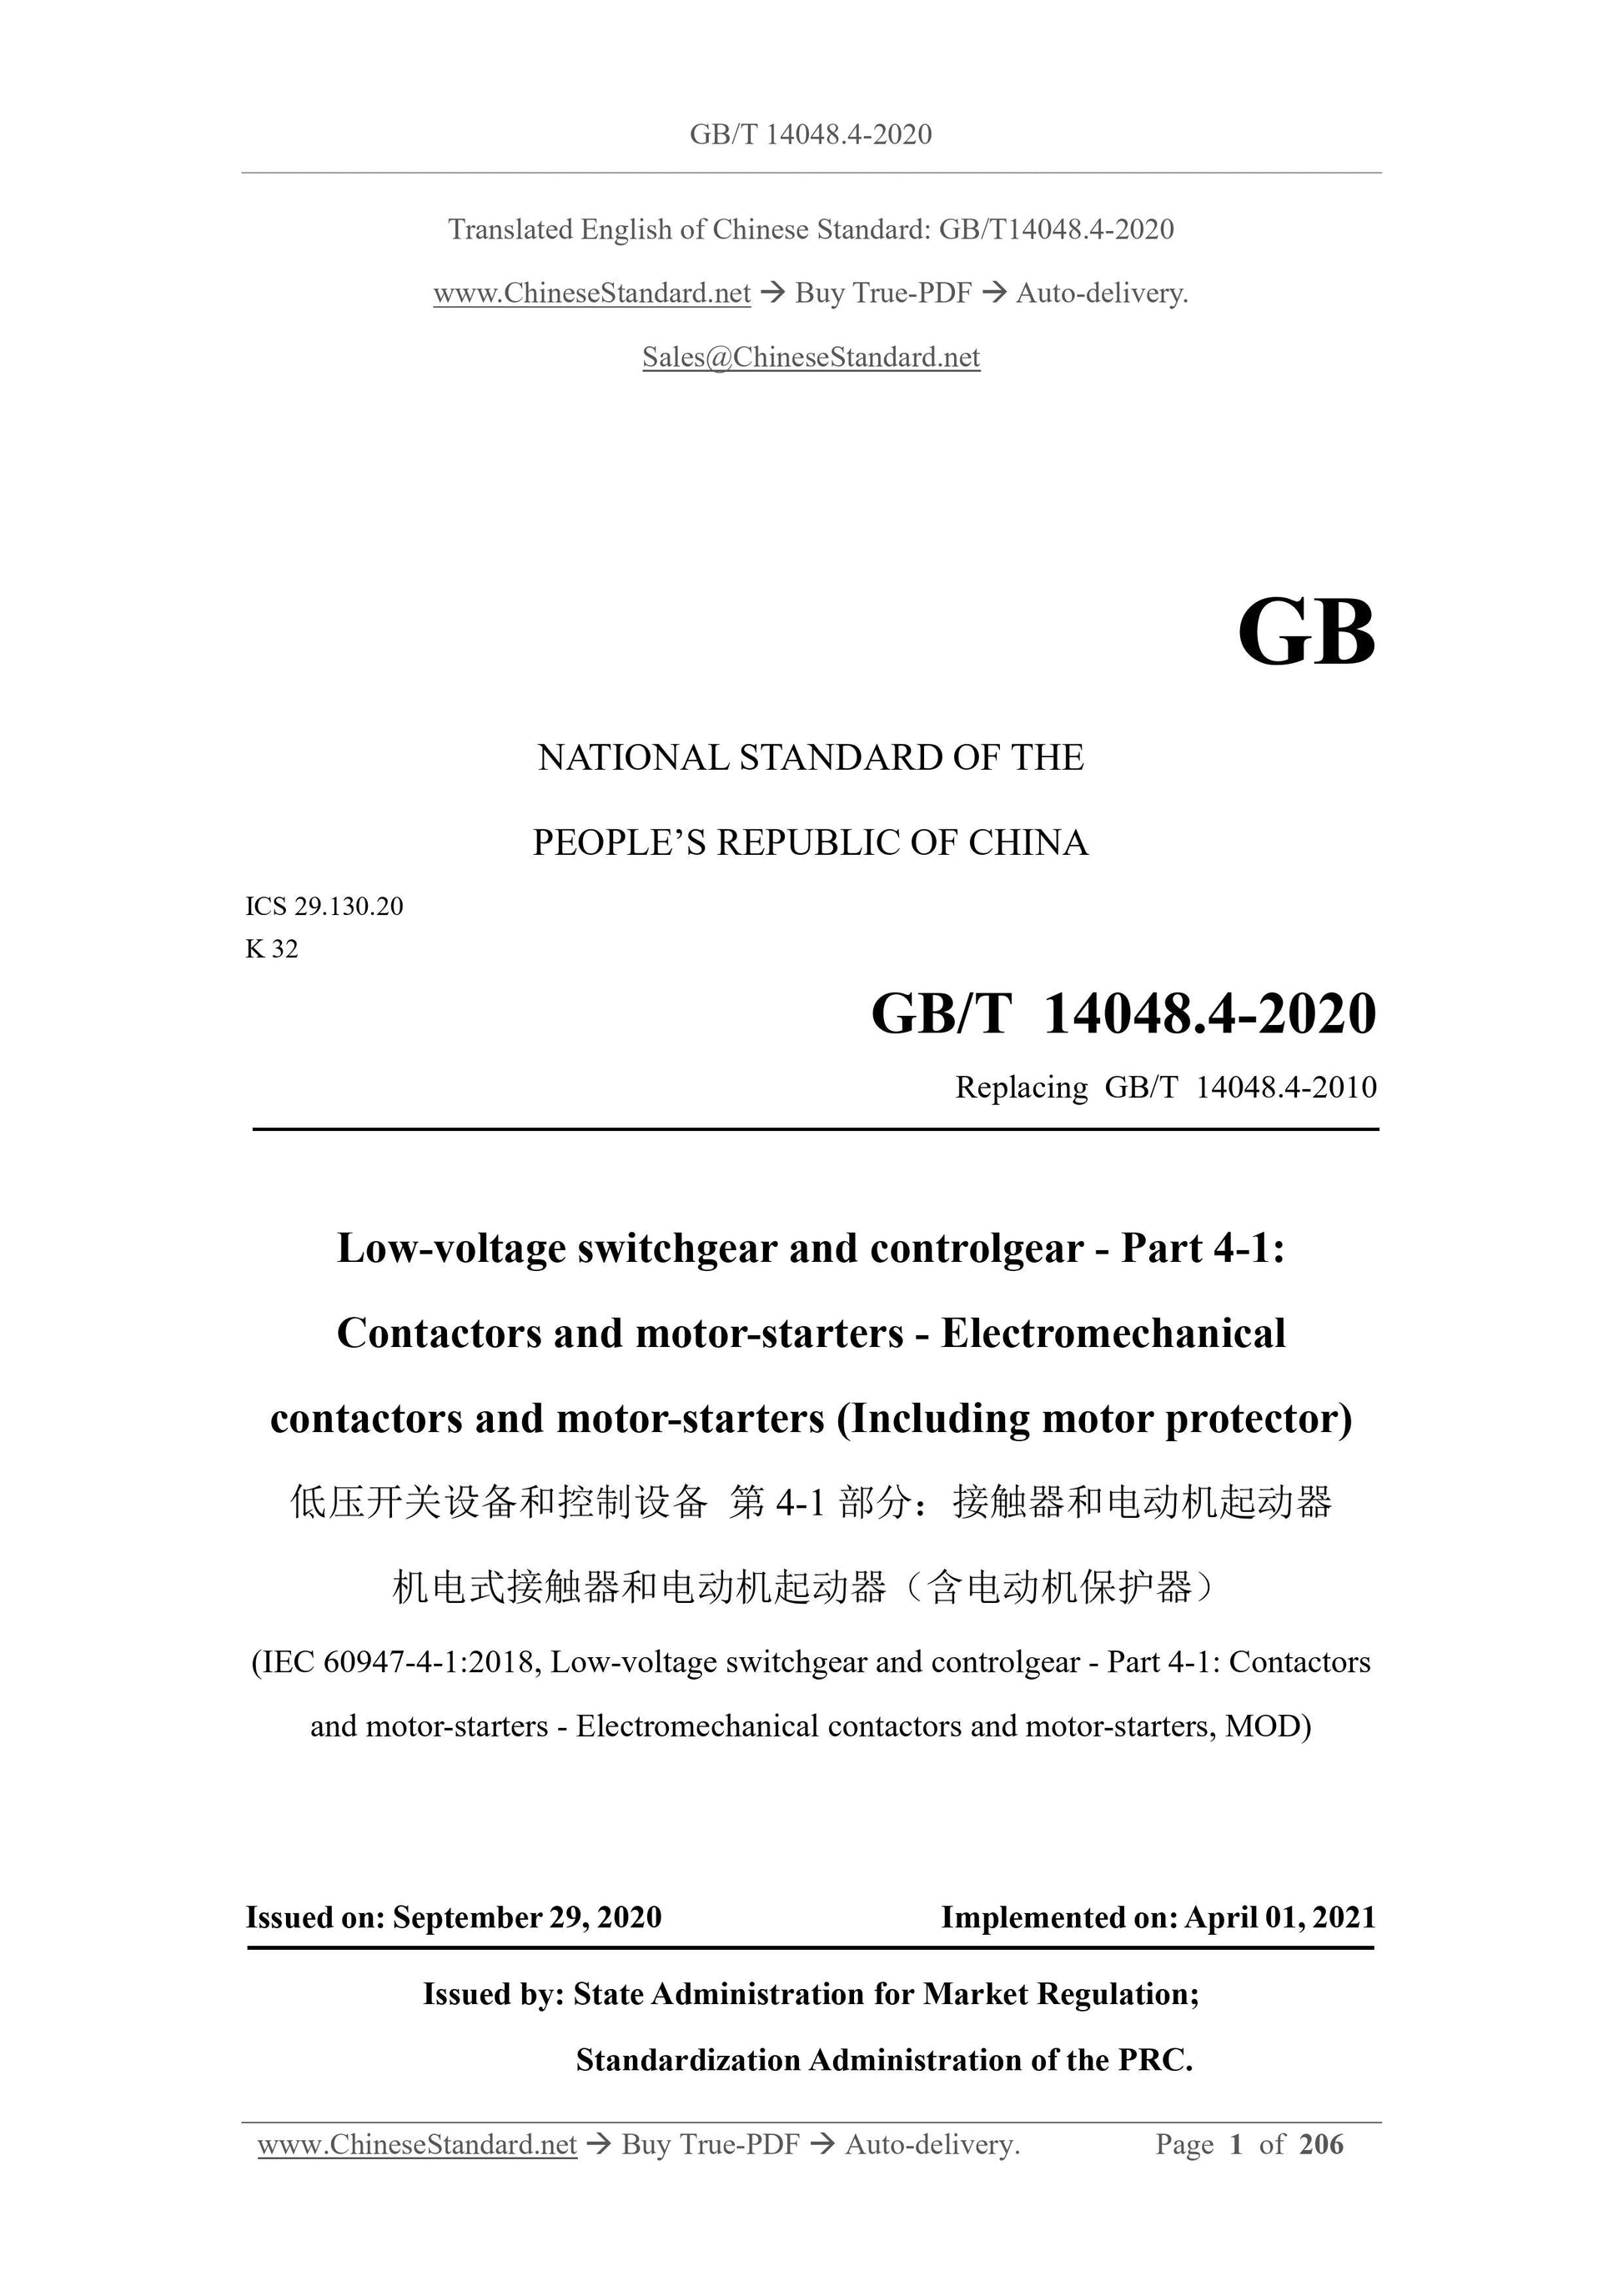 GB/T 14048.4-2020 Page 1